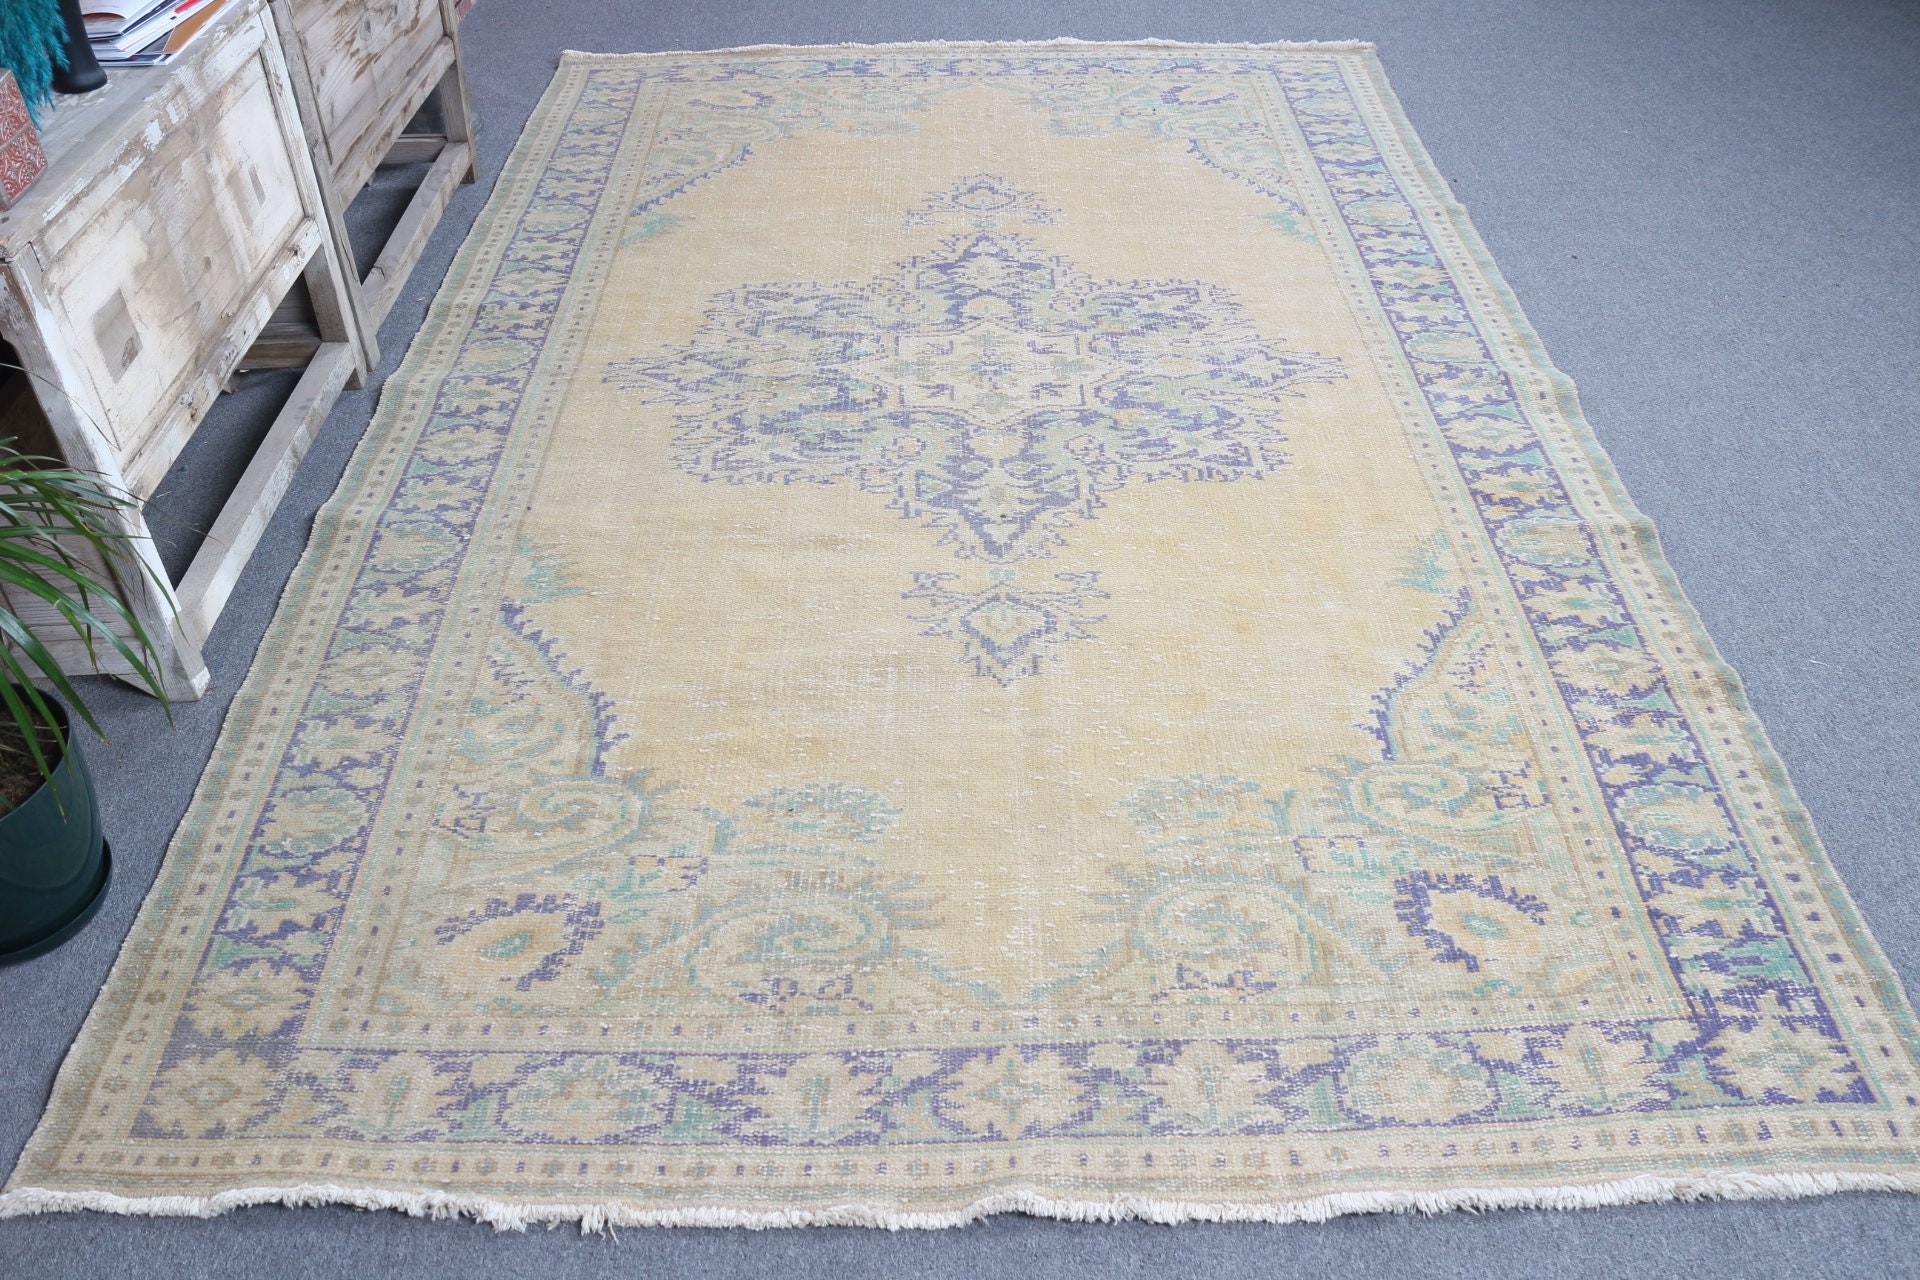 Salon Rugs, 6.1x9.7 ft Large Rugs, Antique Rugs, Turkish Rug, Bedroom Rug, Yellow Kitchen Rug, Rugs for Salon, Moroccan Rug, Vintage Rug